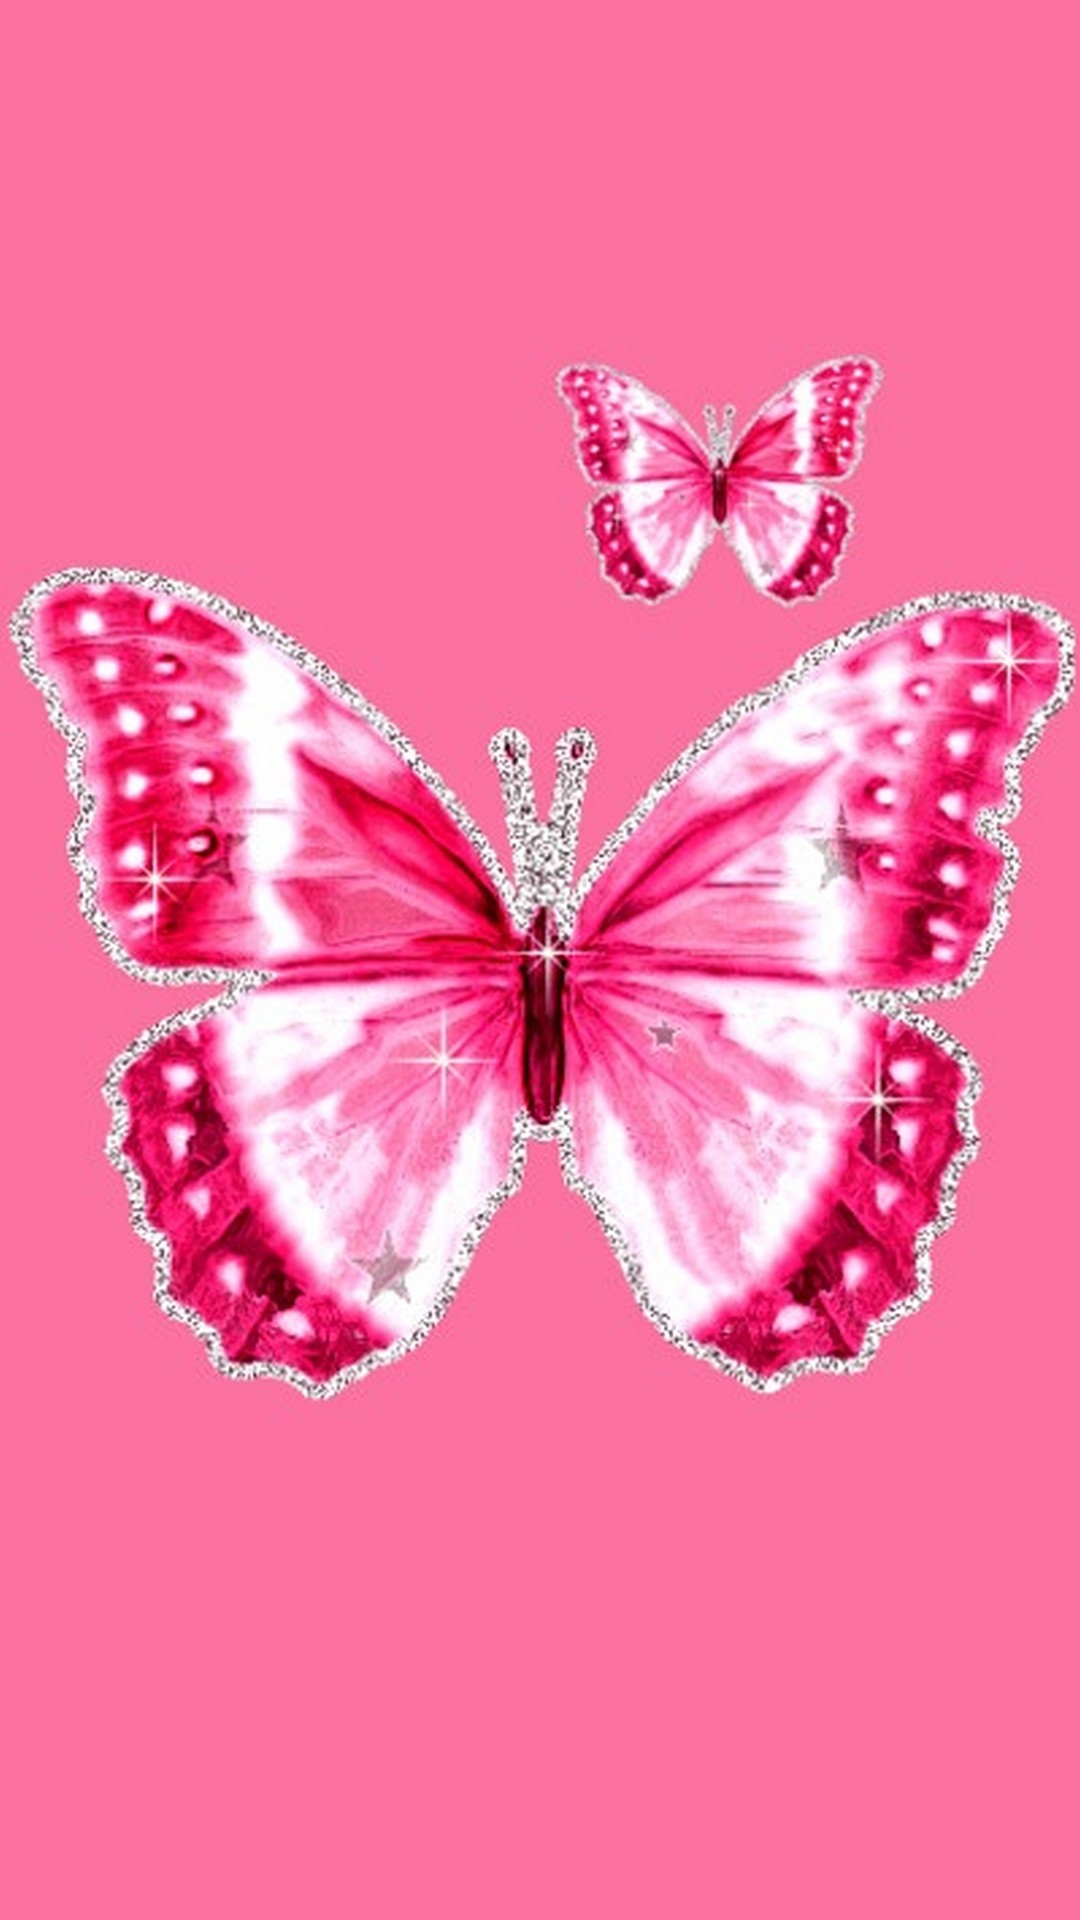 Wallpaper Pink Butterfly Android with HD resolution 1080x1920